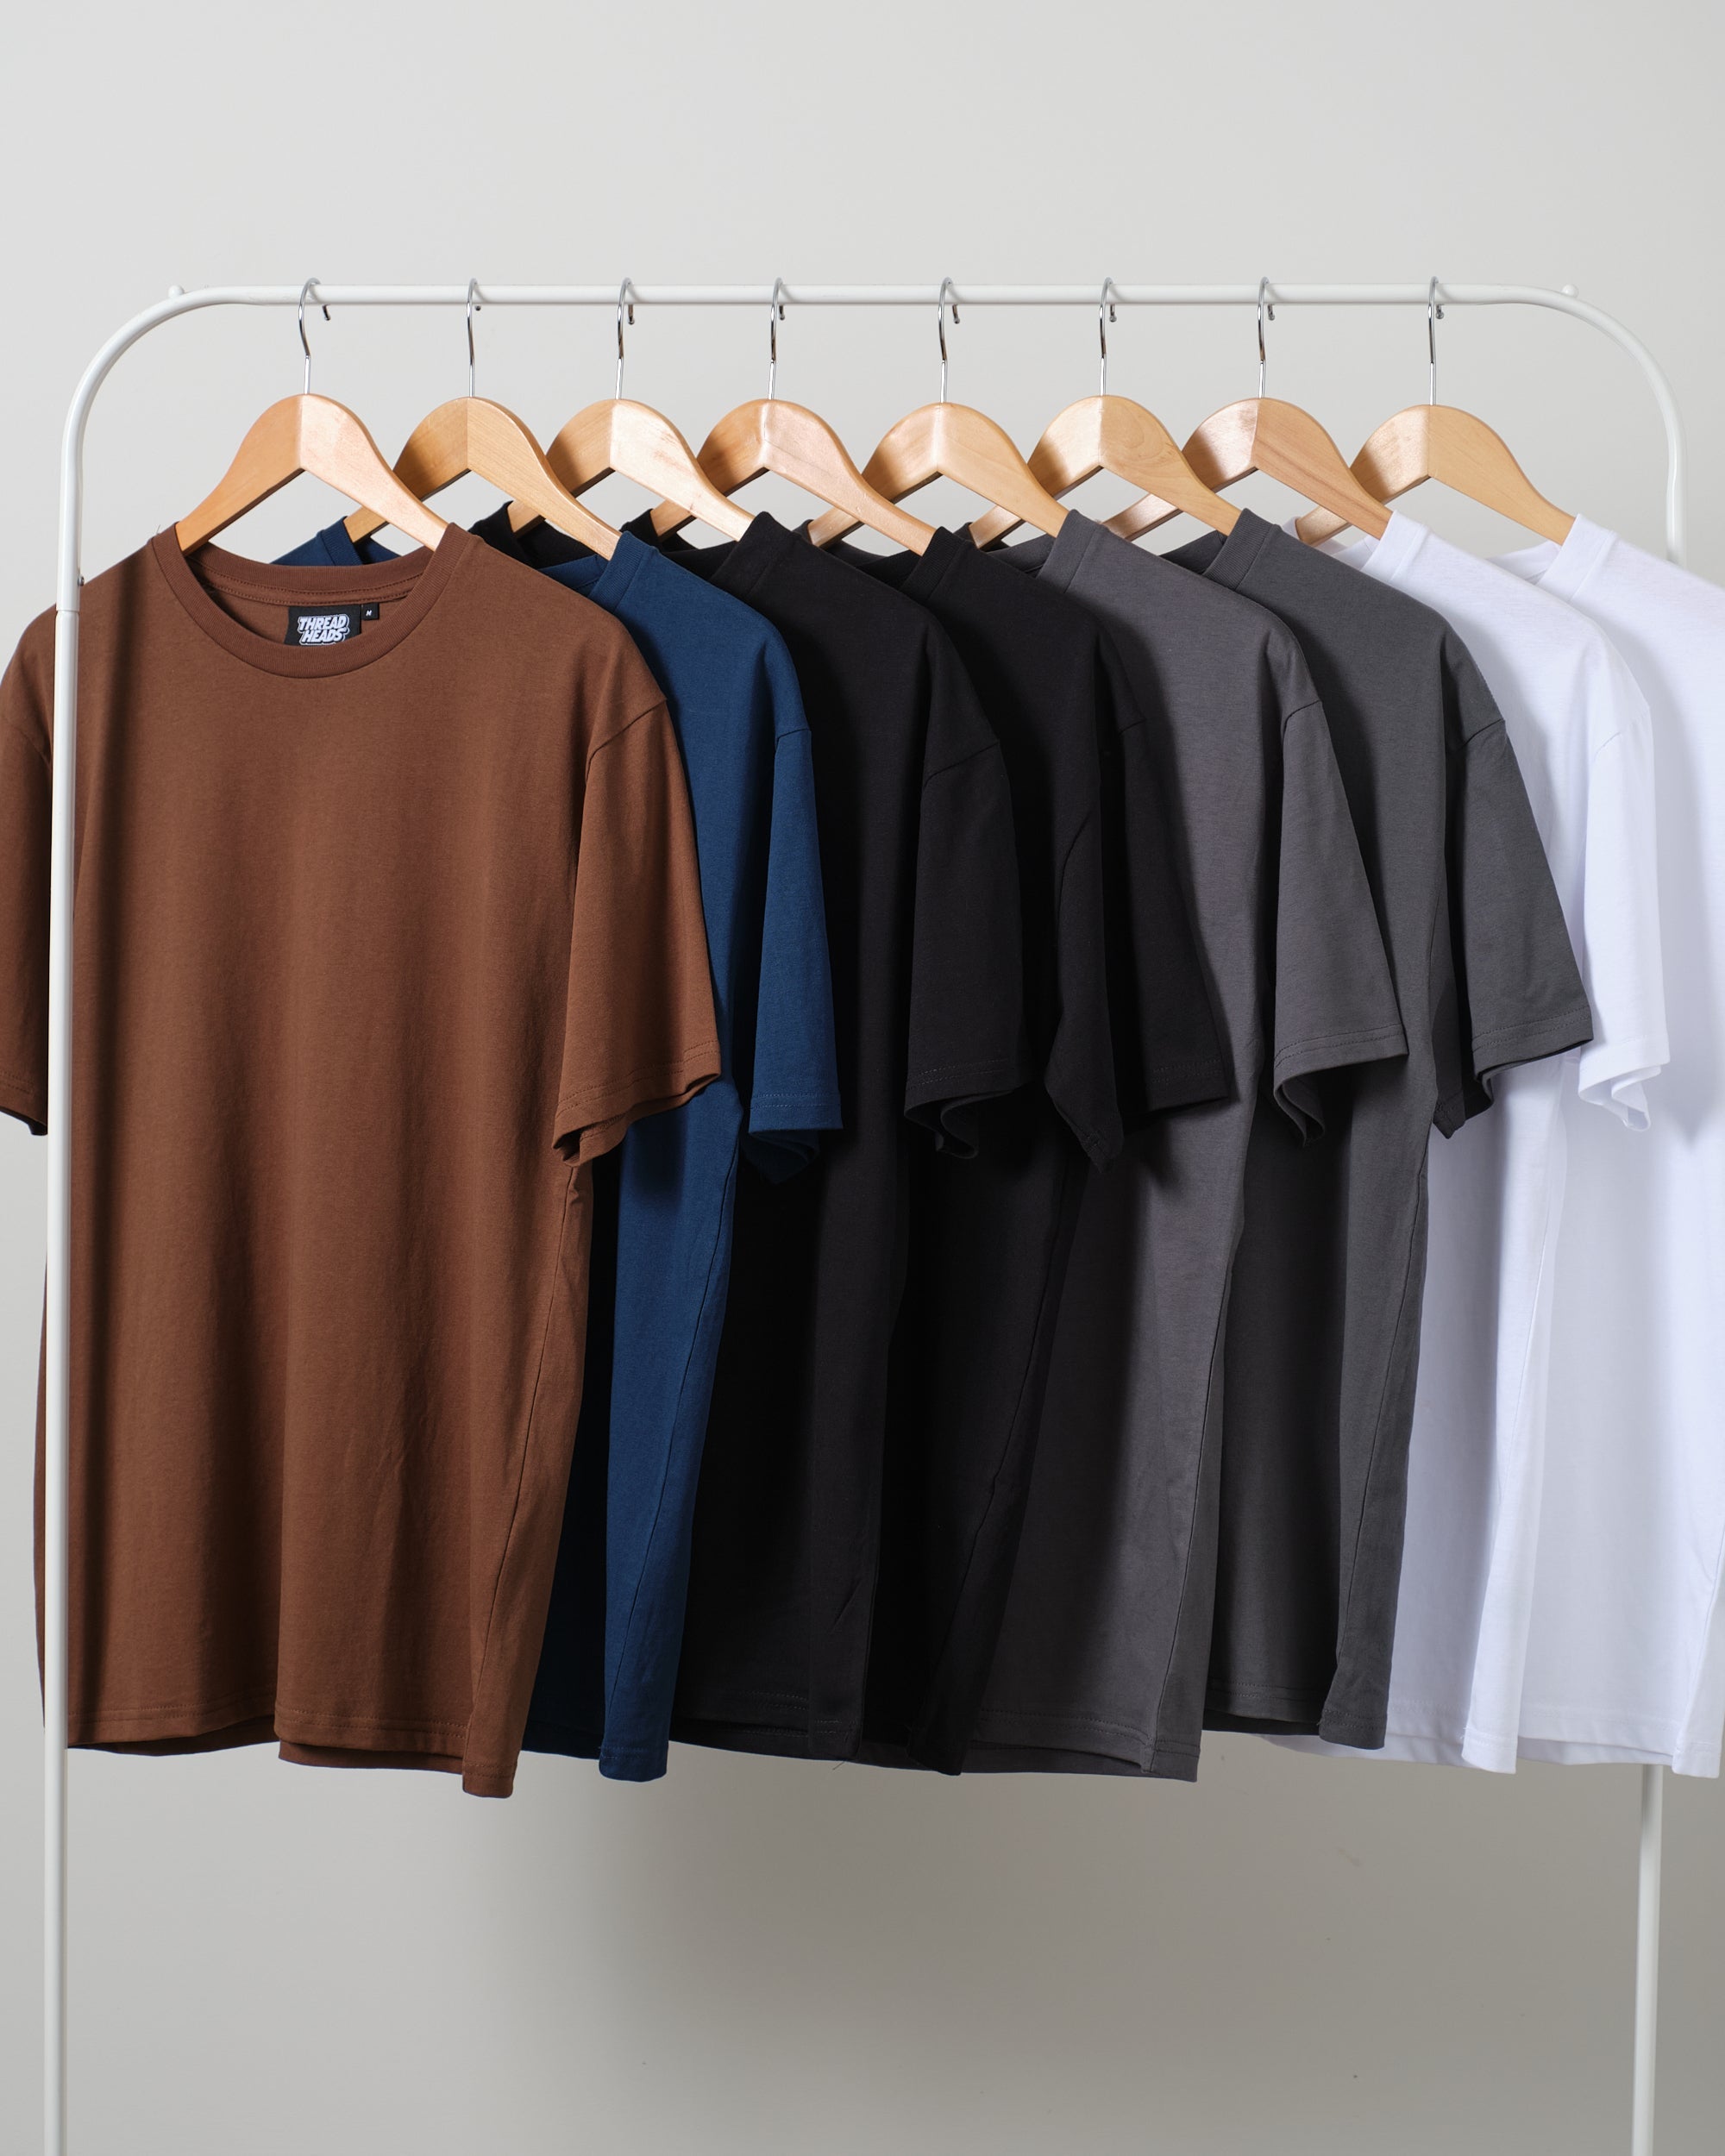 Classic Tee 8 Pack: Brown, Navy, Black, Charcoal, White  Australia Online 